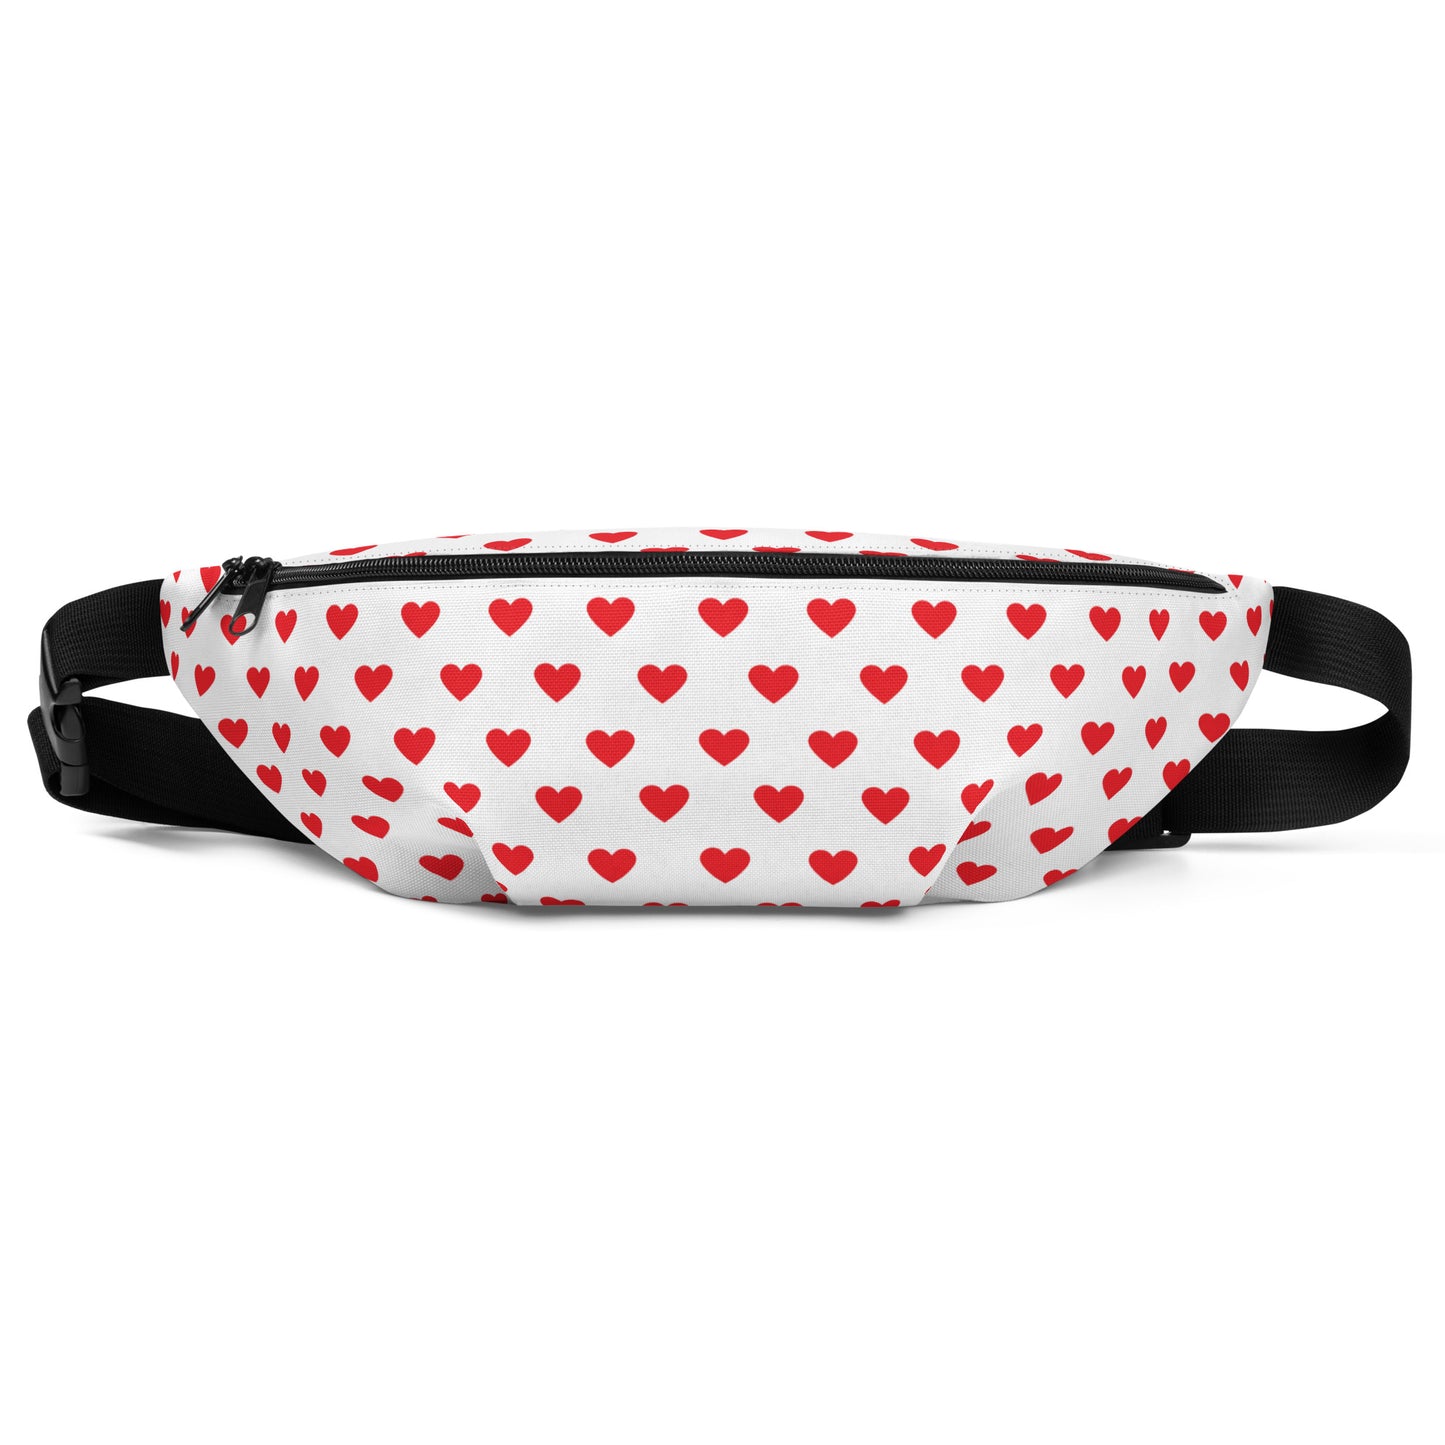 Heart Tile - Inspired By Harry Styles - Sustainably Made Fanny Pack